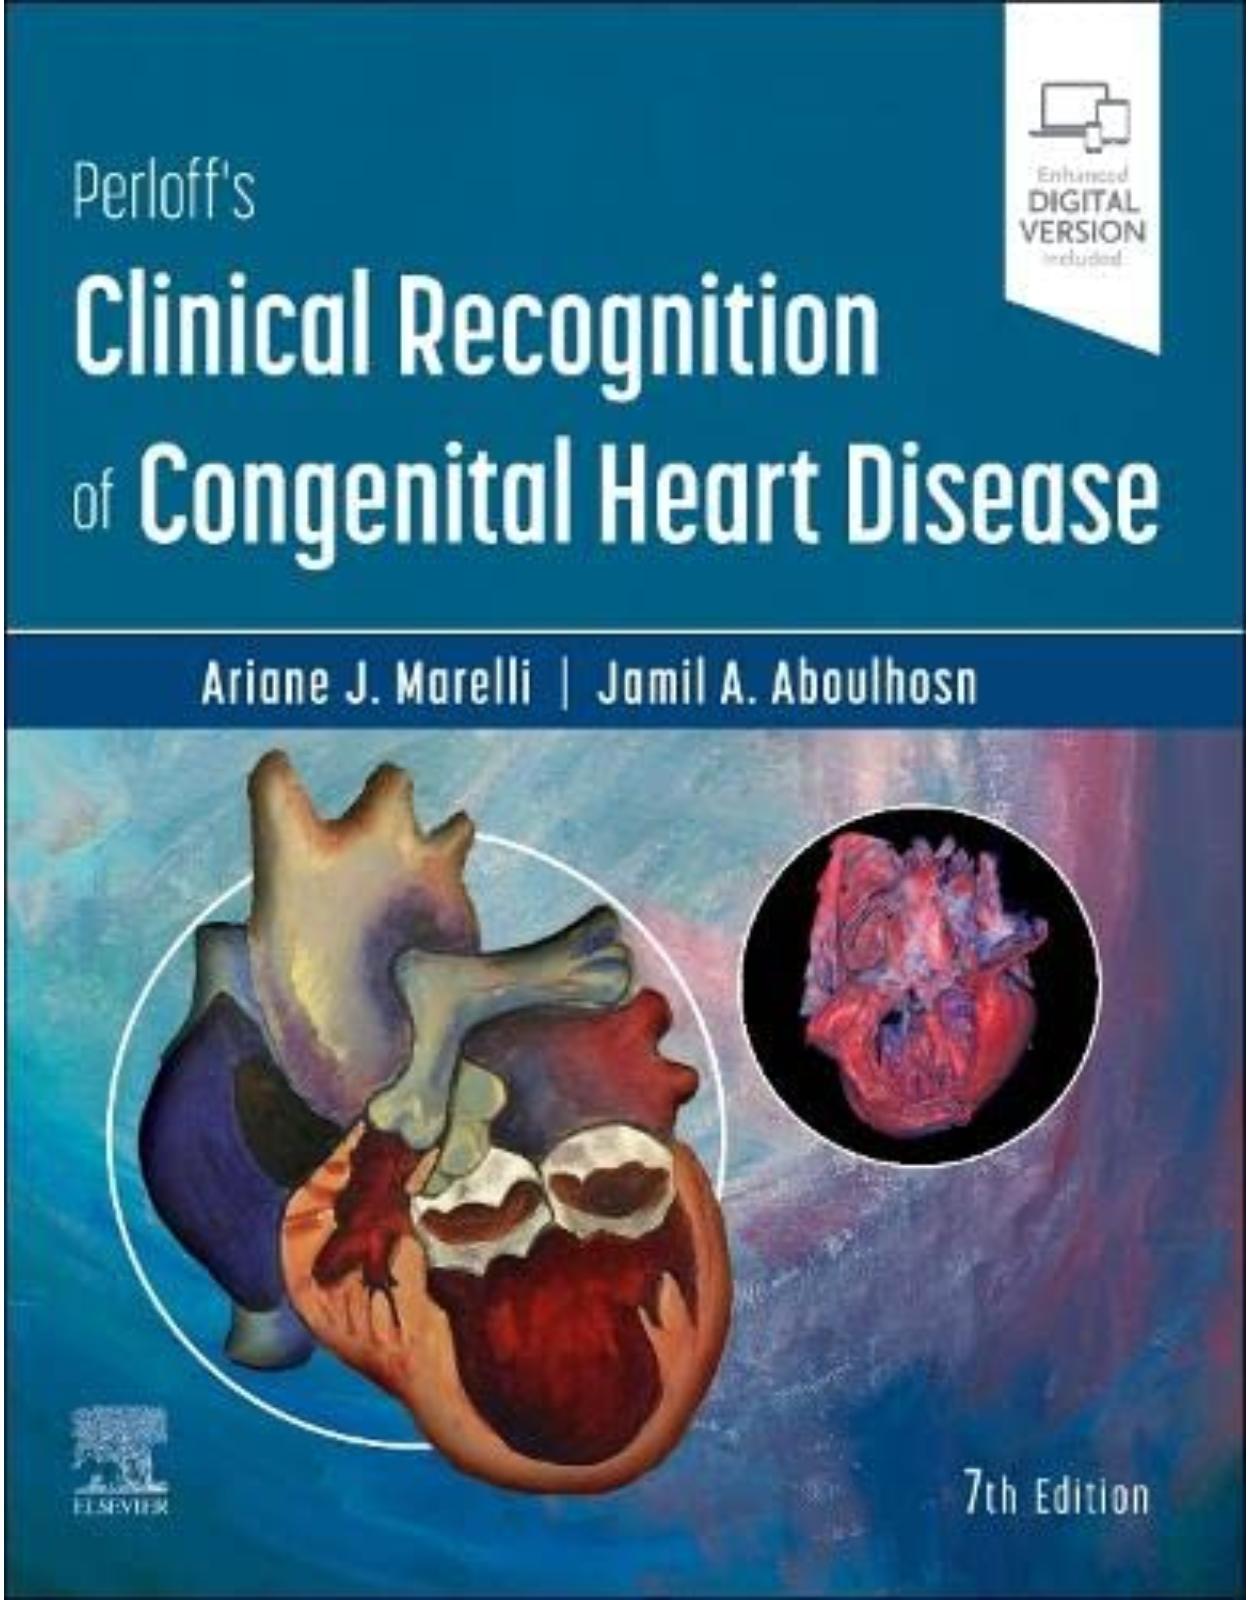 Perloff’s Clinical Recognition of Congenital Heart Disease